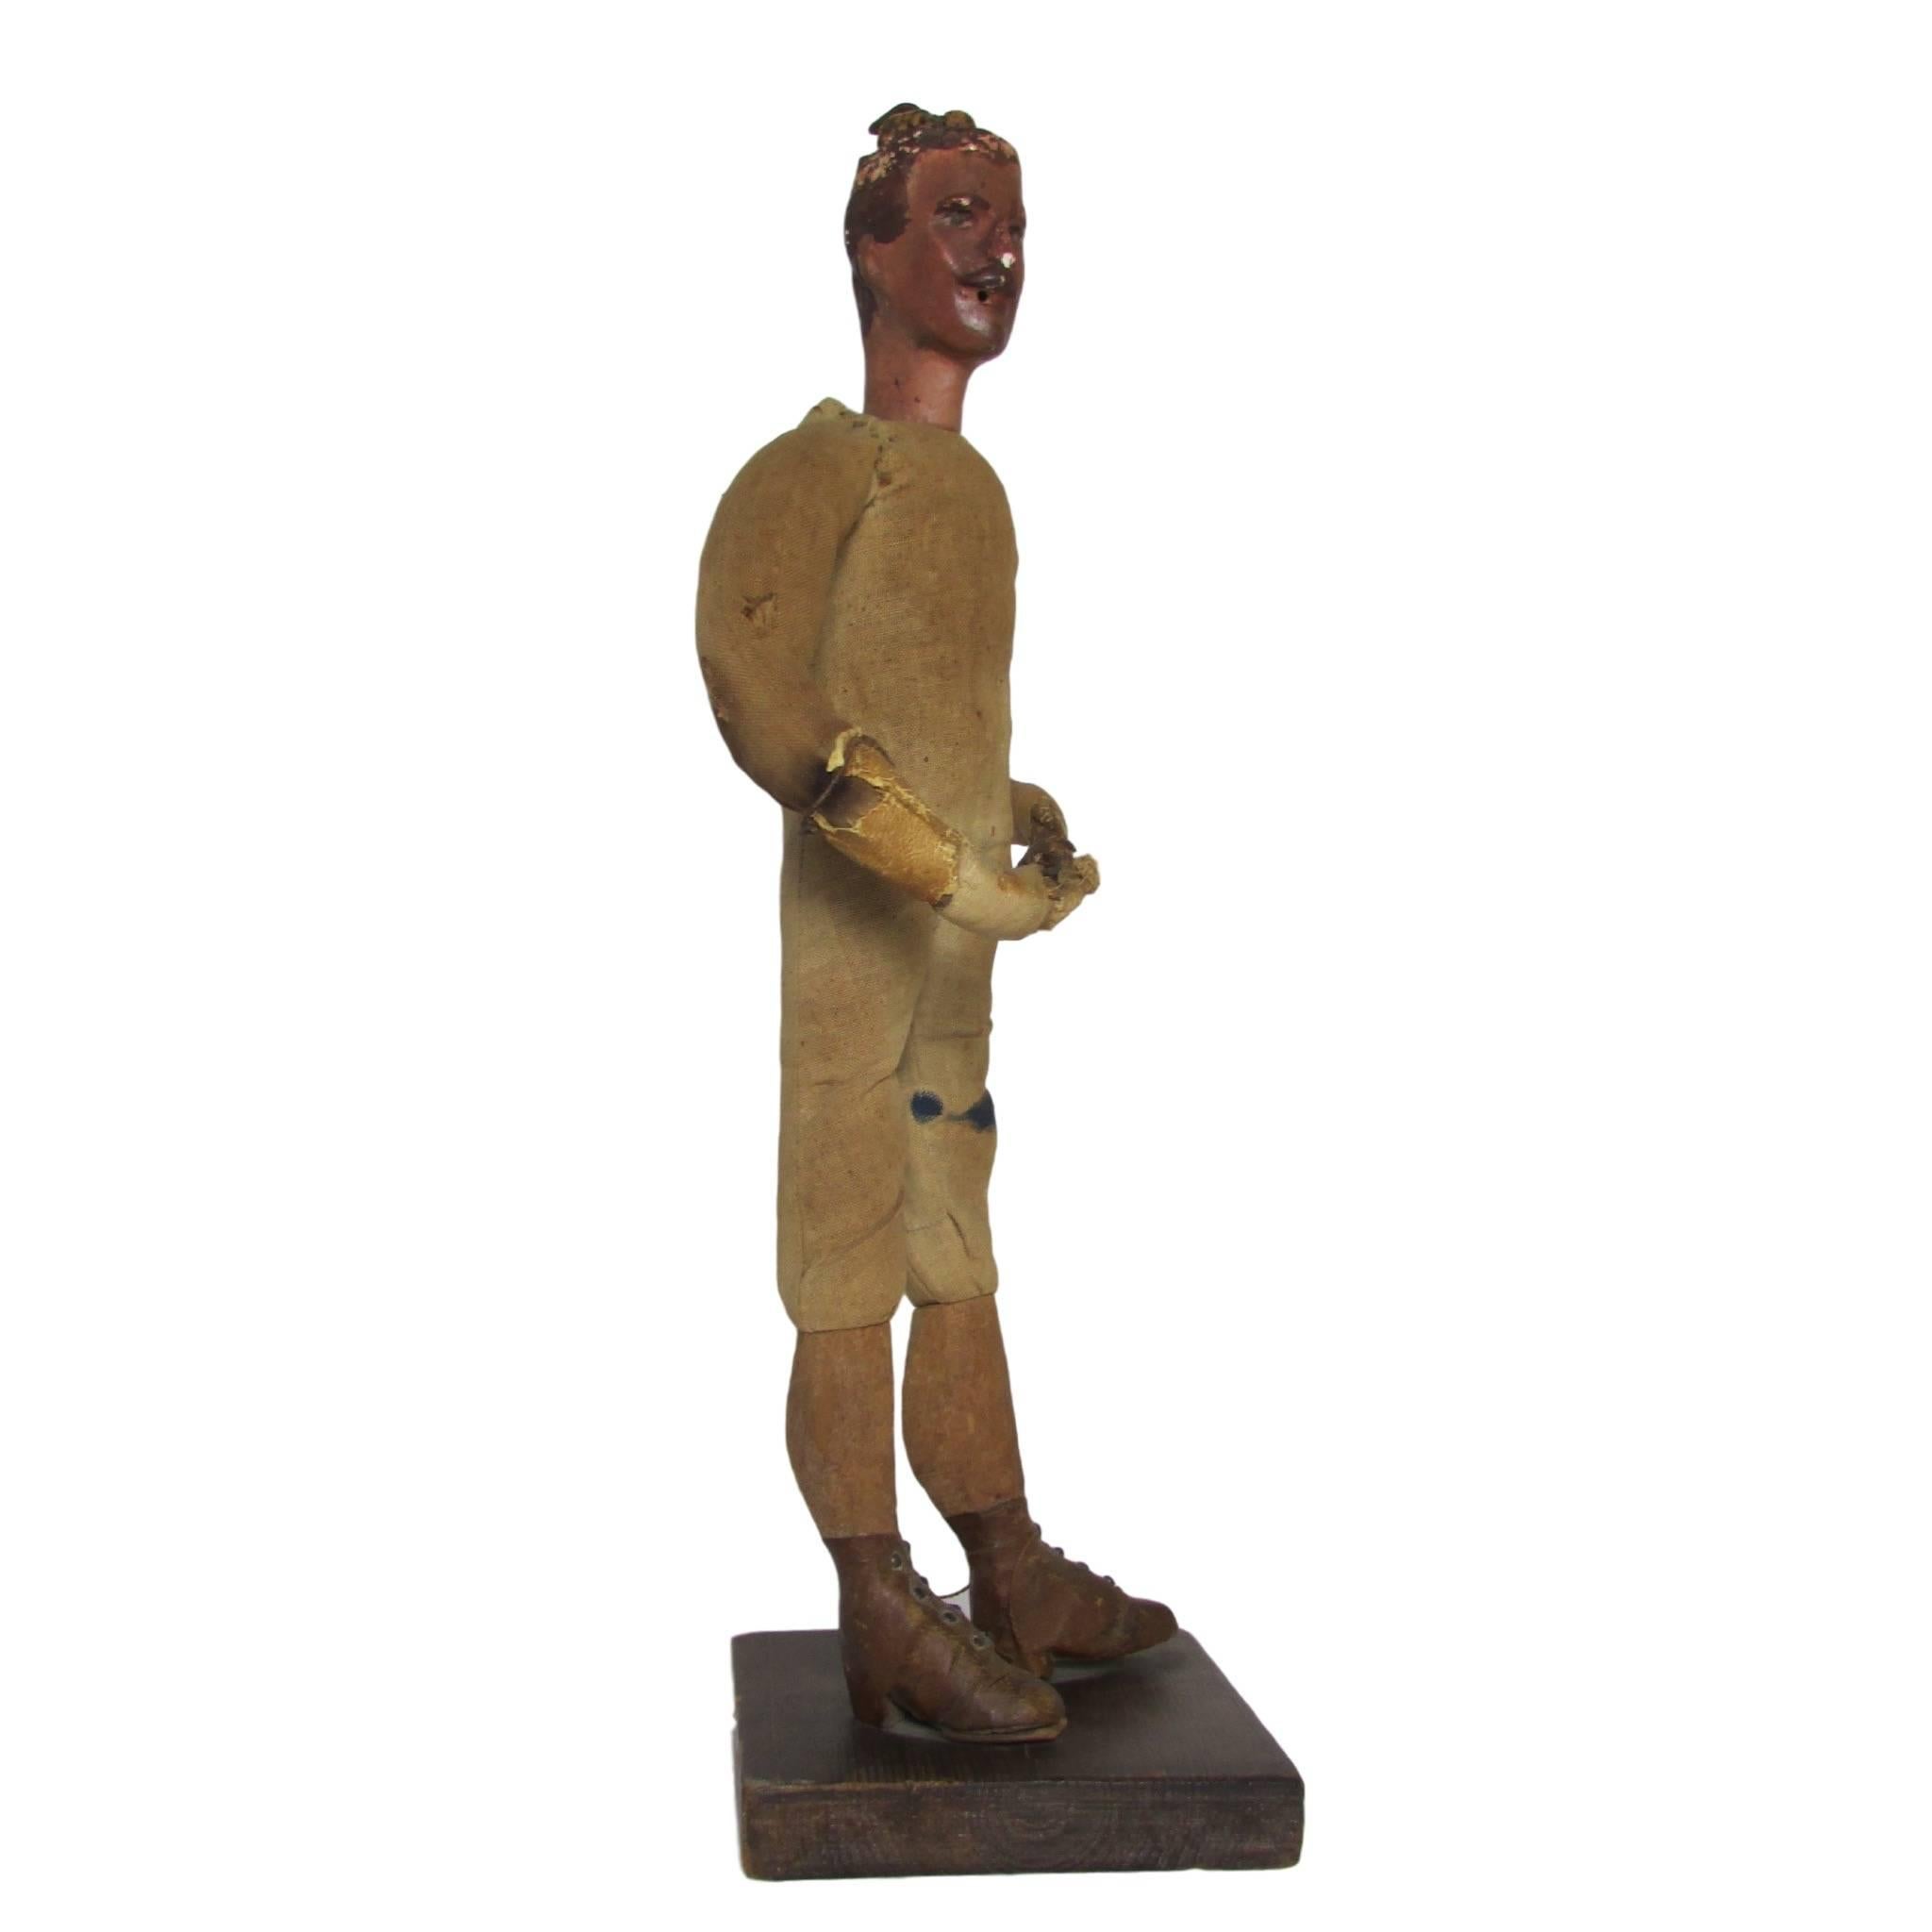 This is a rare and unique hand carved French figurine of a mustached man in leather boots on a wood stand.  His body is made of hand sewn muslin that has been stuffed with wood shavings. His forearms and hands are wrapped in leather that is sewn to